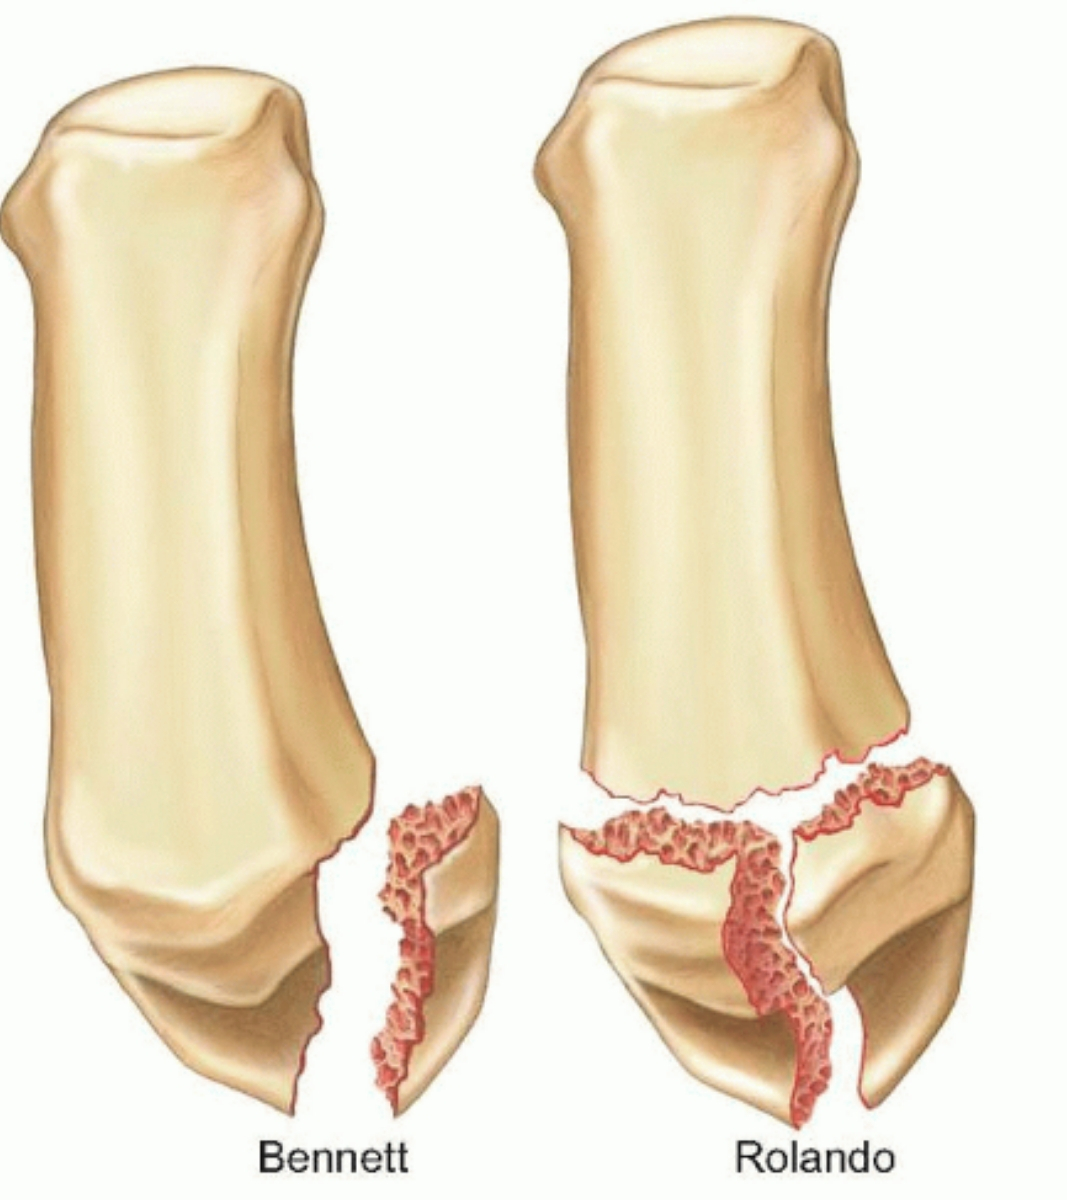 Thumb fracture, thumbe care and treatment, Thumb fracture surgeons, causes of thumn fractures, symtoms of thumb fractures